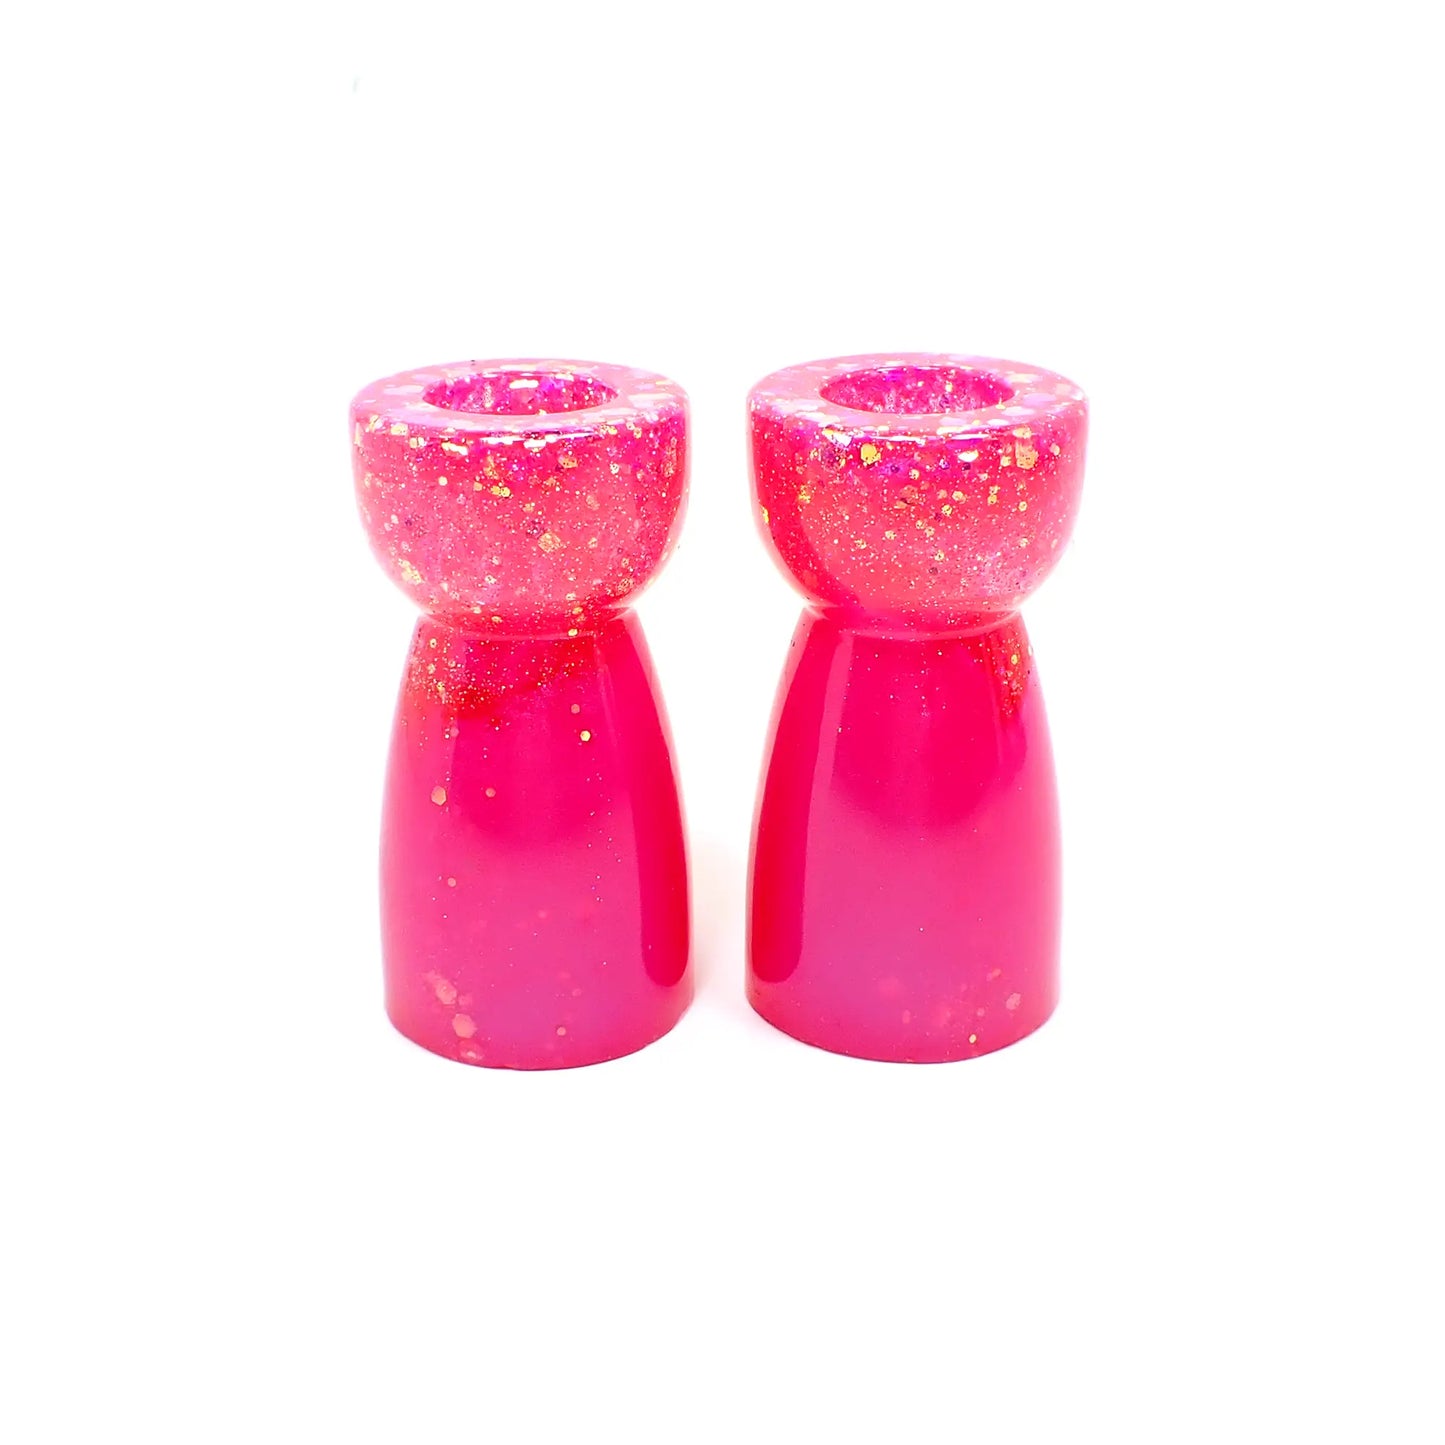 Side view of the handmade resin candlestick holders. They have bright pearly pink resin and chunky iridescent glitter. The glitter shows mostly at the top portion of the pieces. They are rounded on top and a cone like shape underneath that flares out to the bottom.